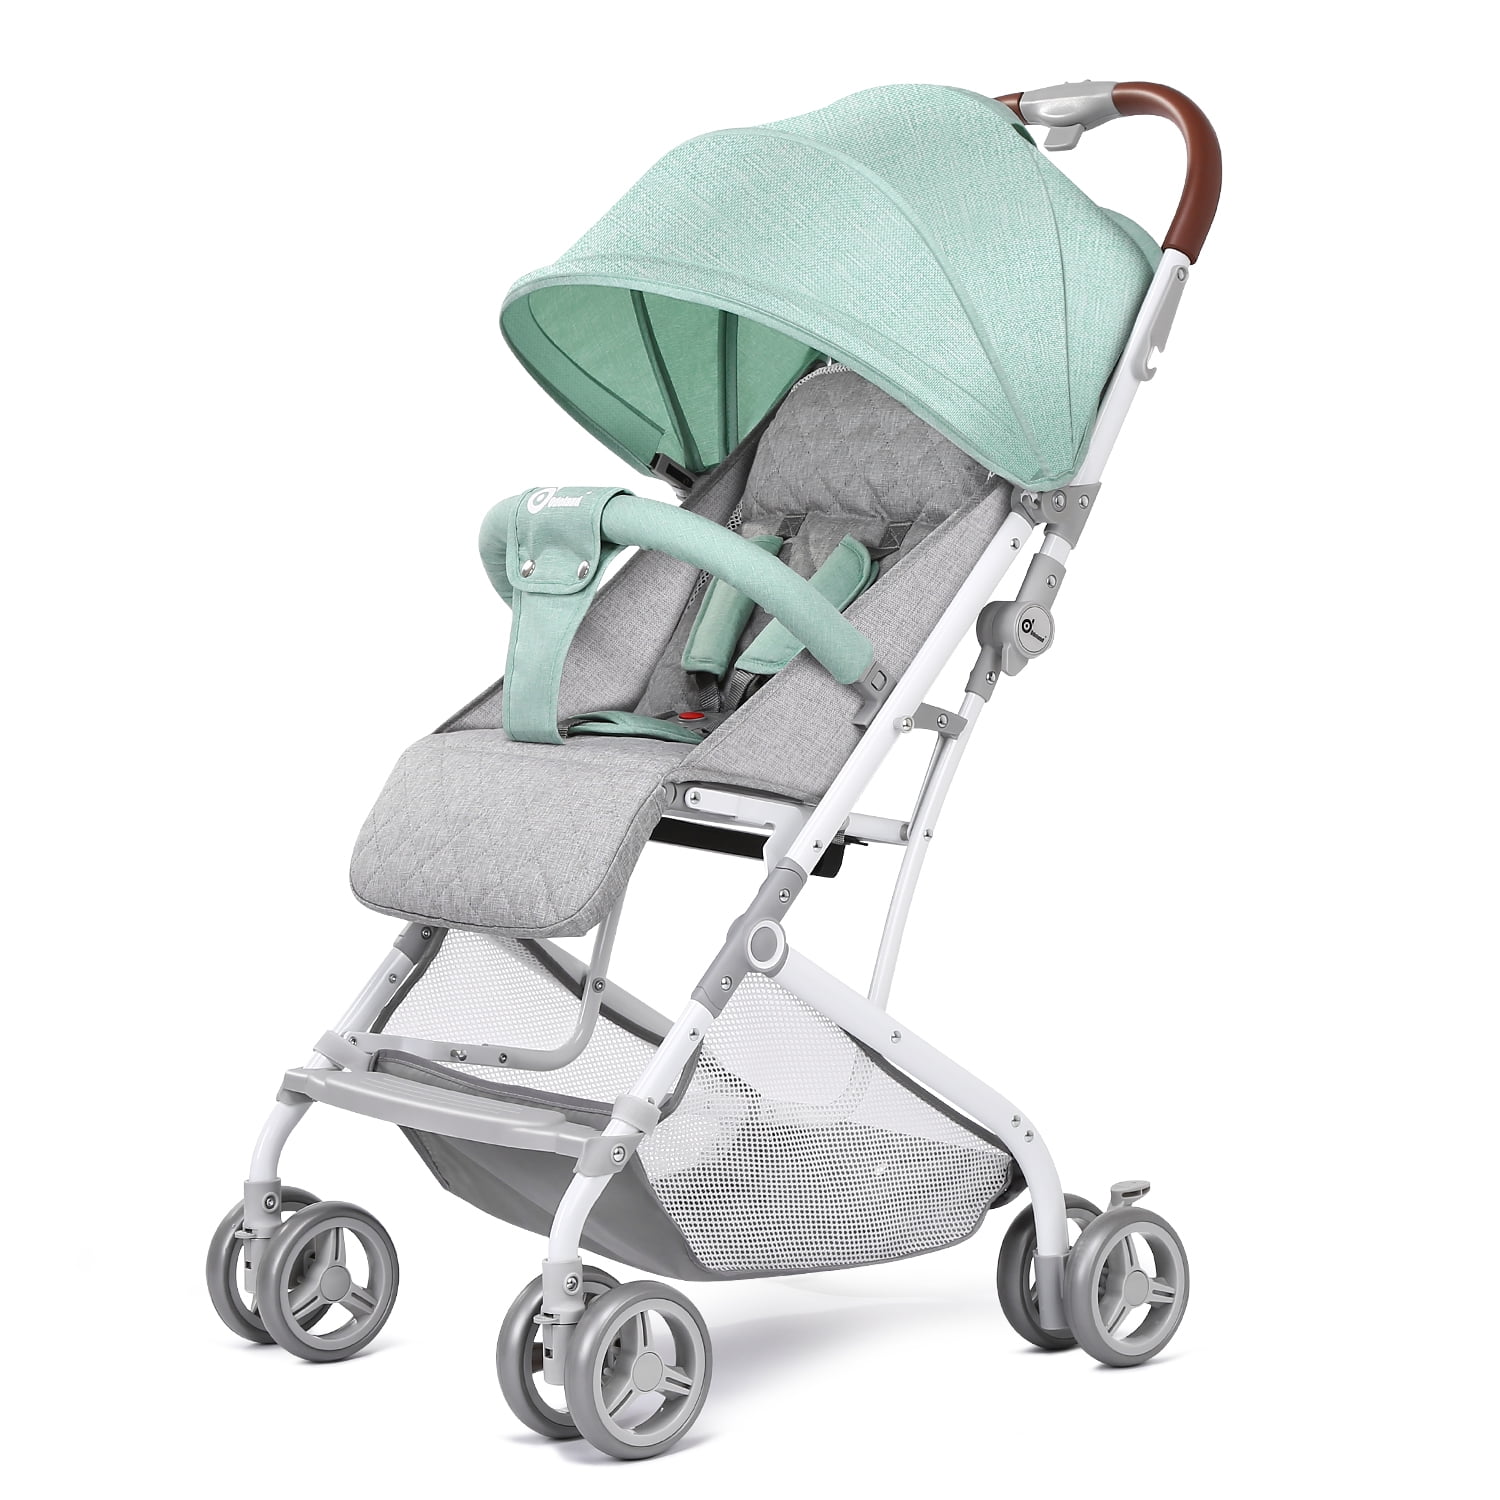 which is the lightest stroller